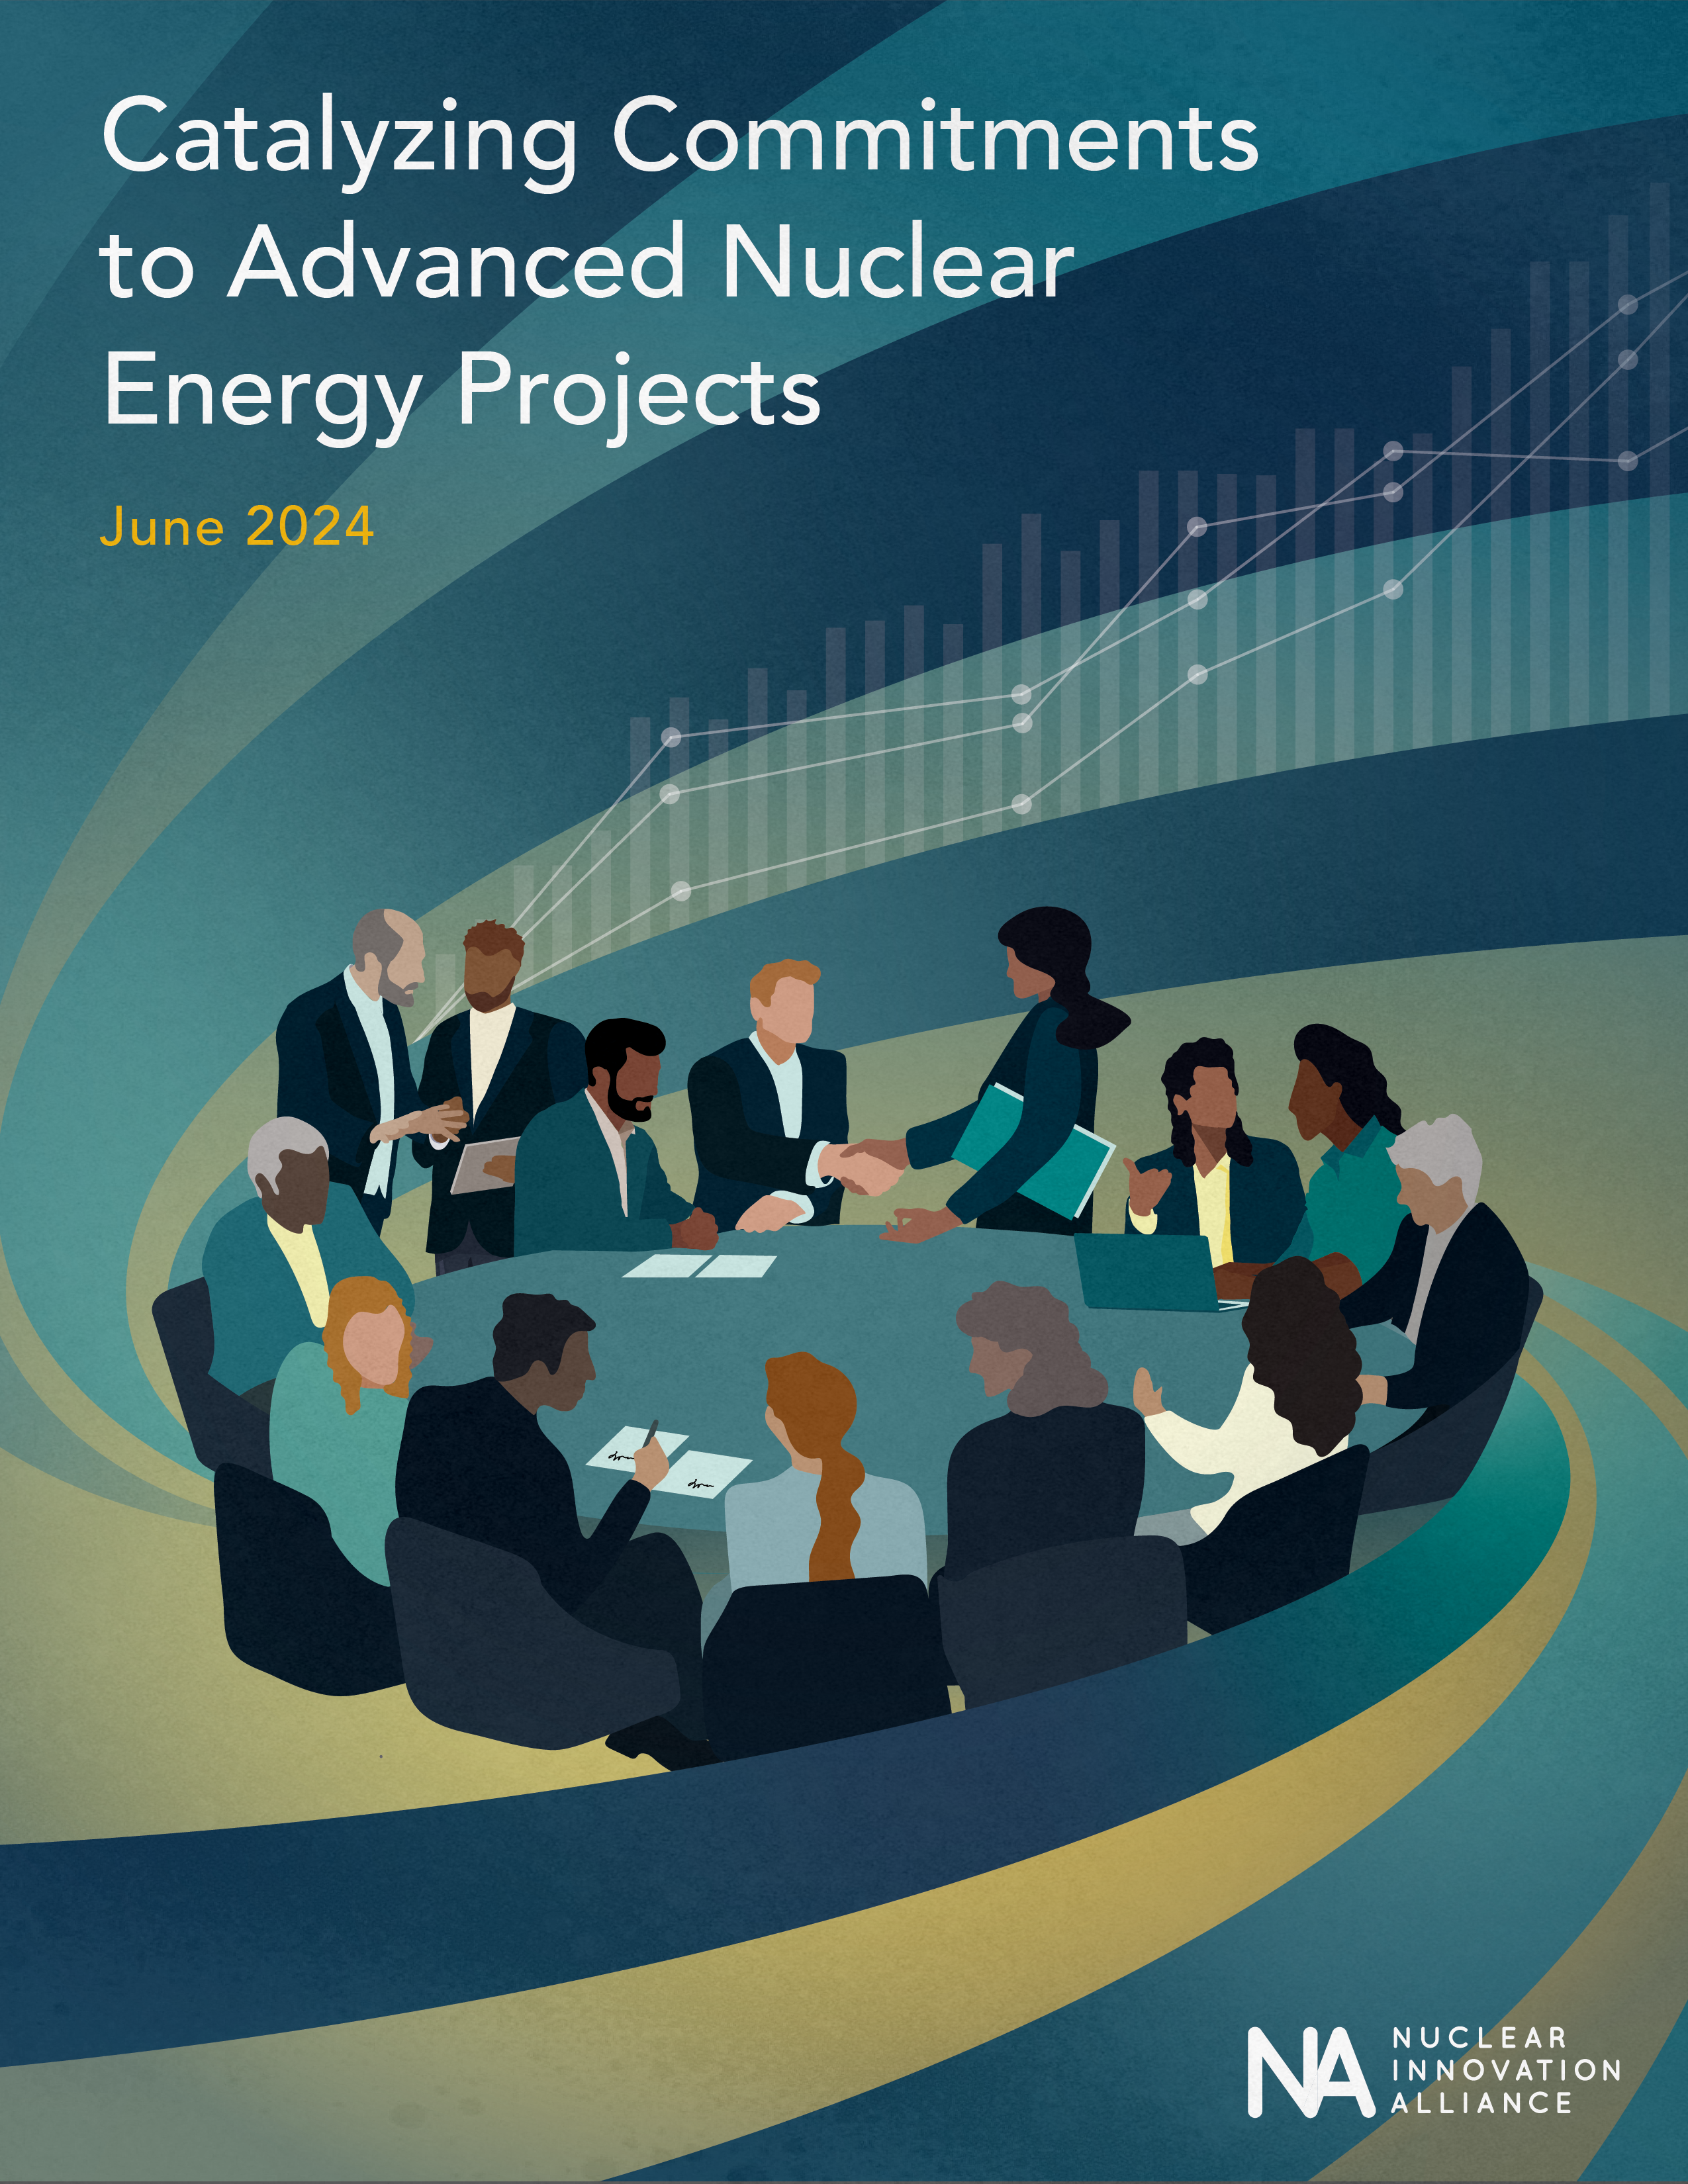 Catalyzing Commitments to Advanced Nuclear Energy Projects